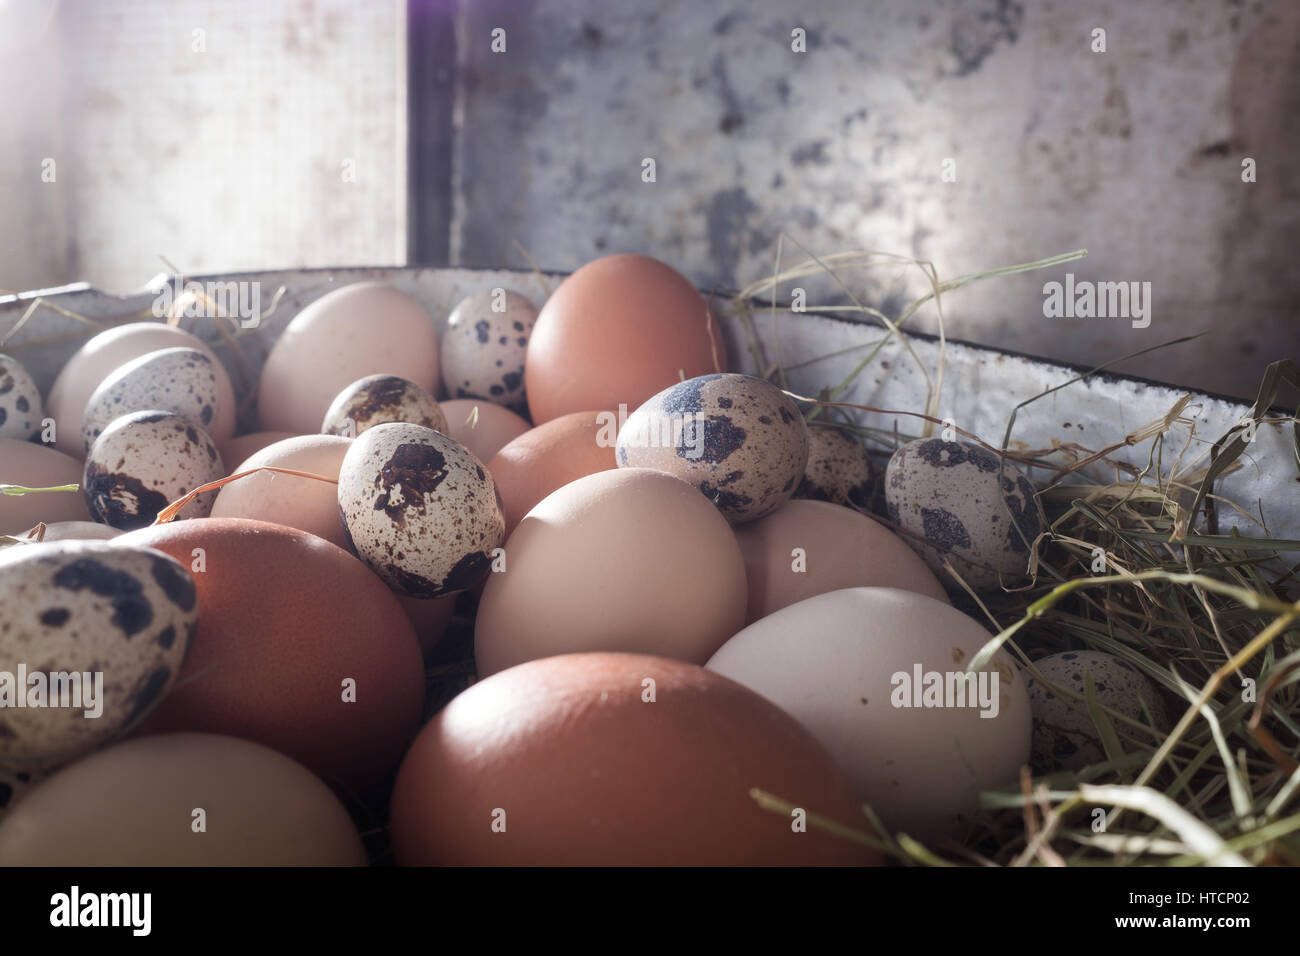 Chicken and quail eggs laid on hay Stock Photo